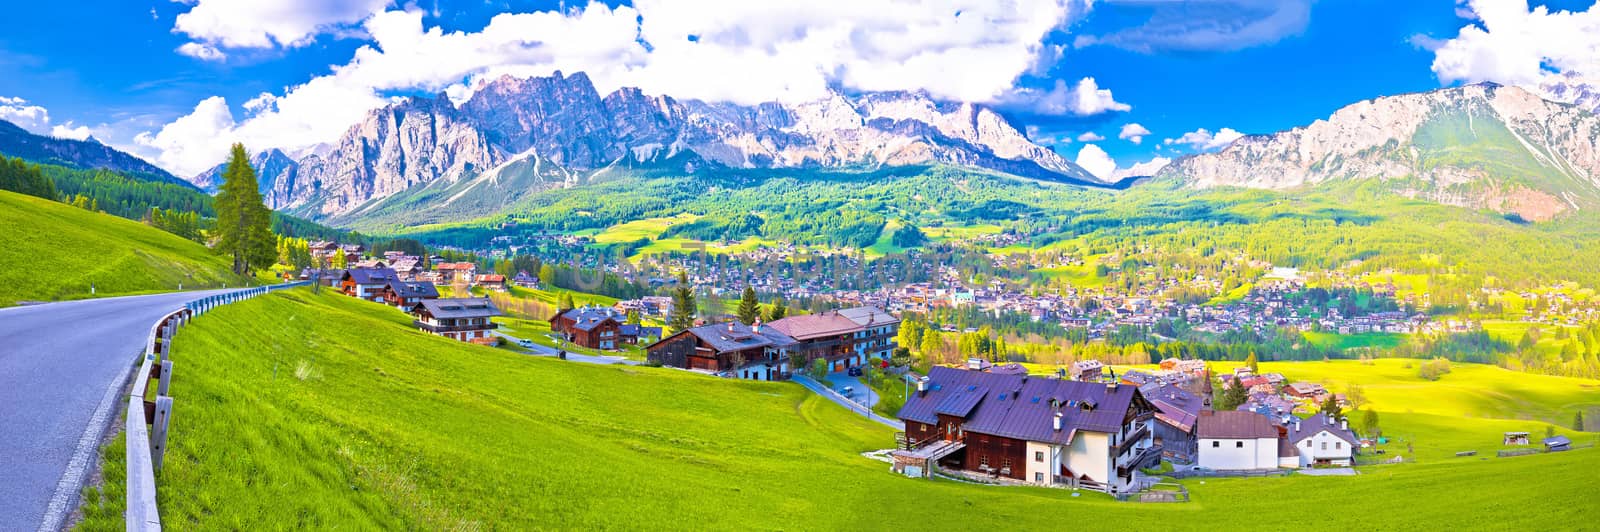 Beautiful town of Cortina d' Ampezzo in Dolomites Alps panoramic by xbrchx